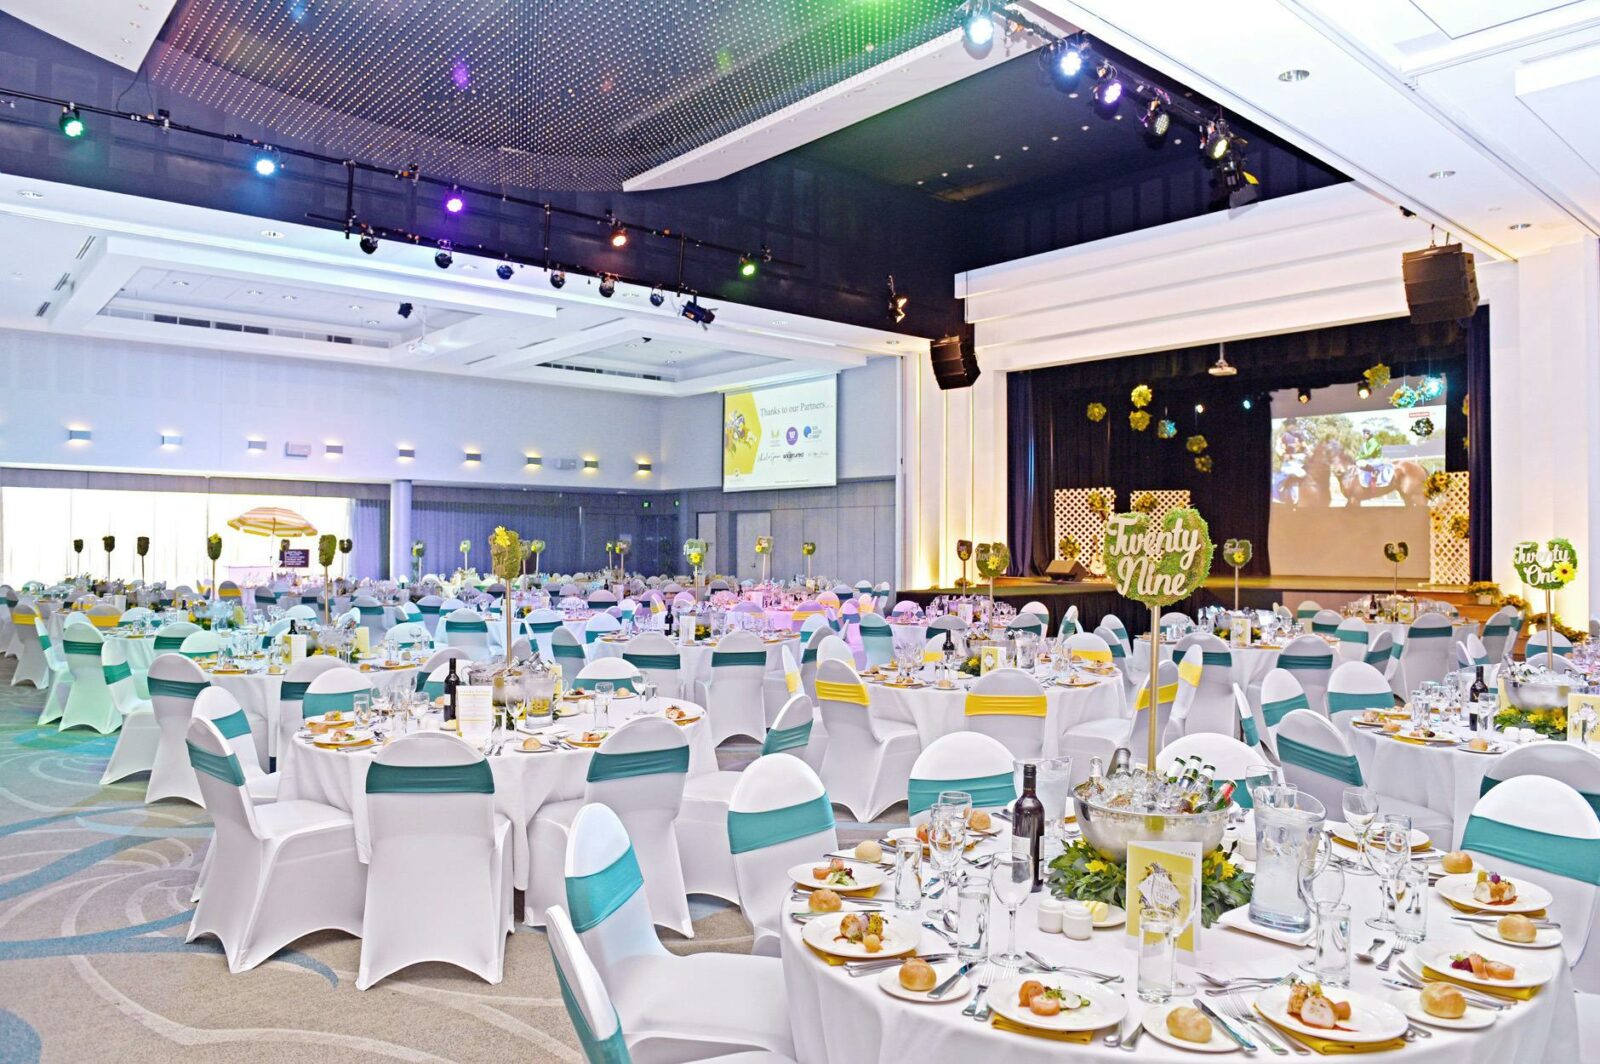 A gala lunch decorated with blue, white and gold theming